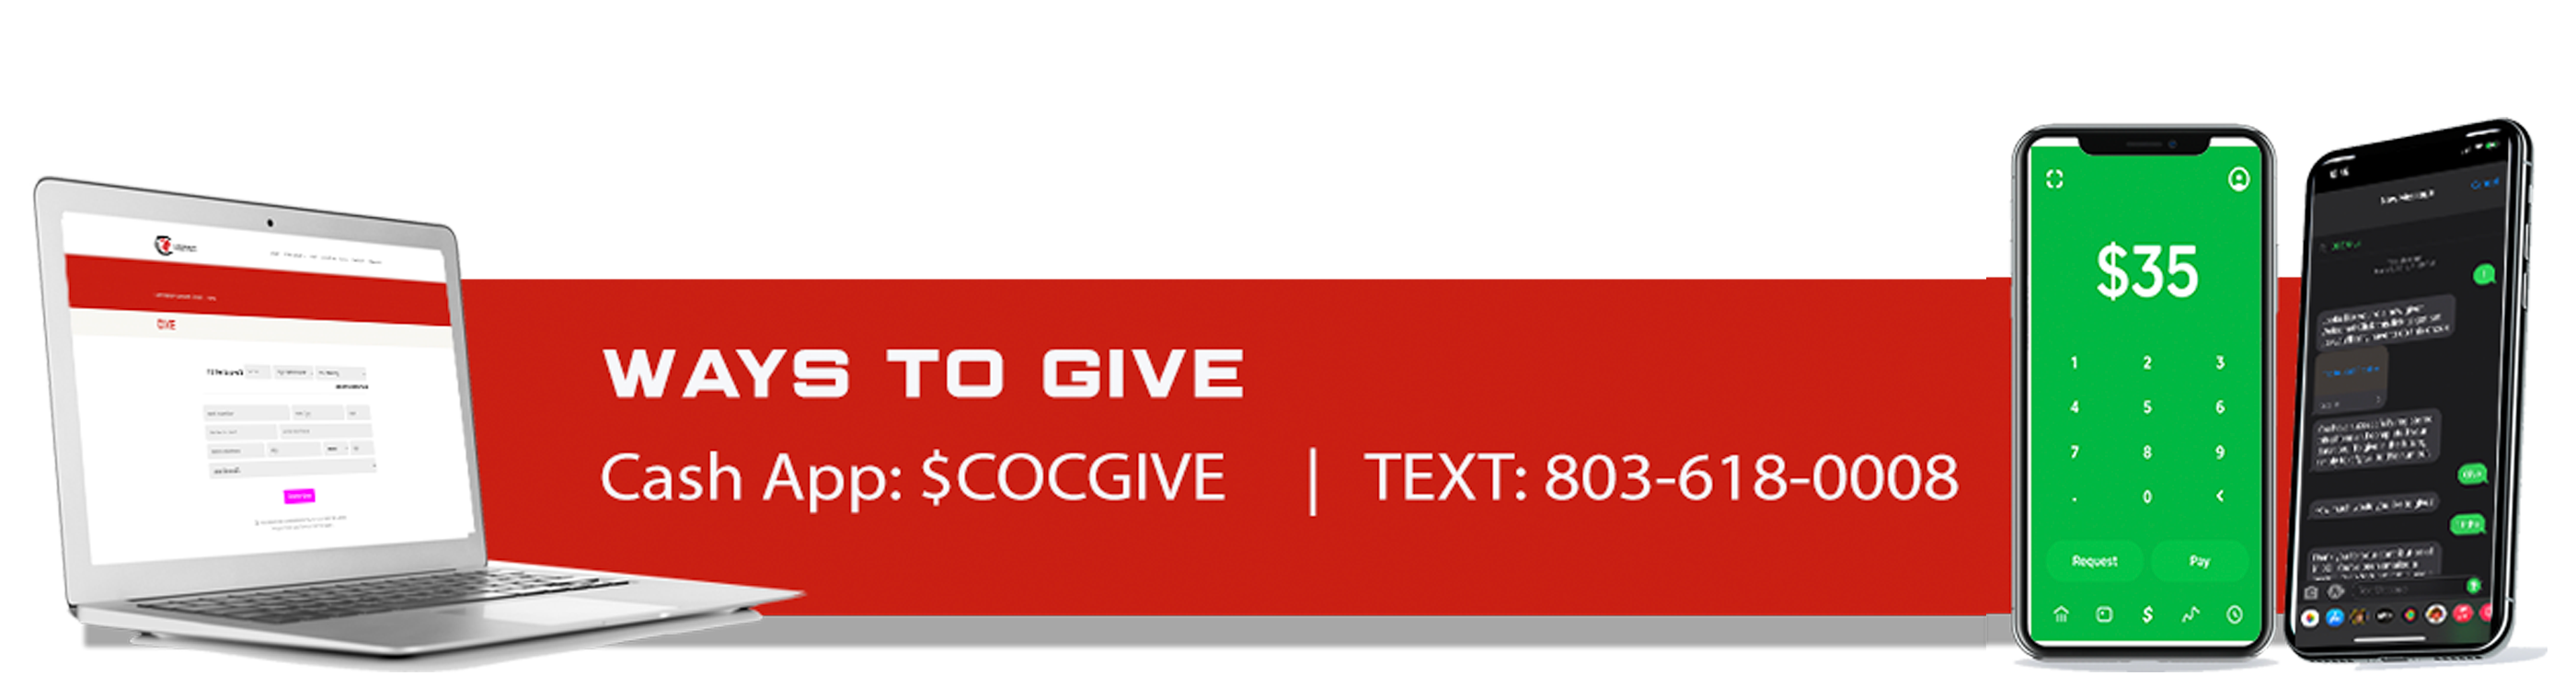 Ways to give by Cash App $COCGIVE Text 803-618-0008